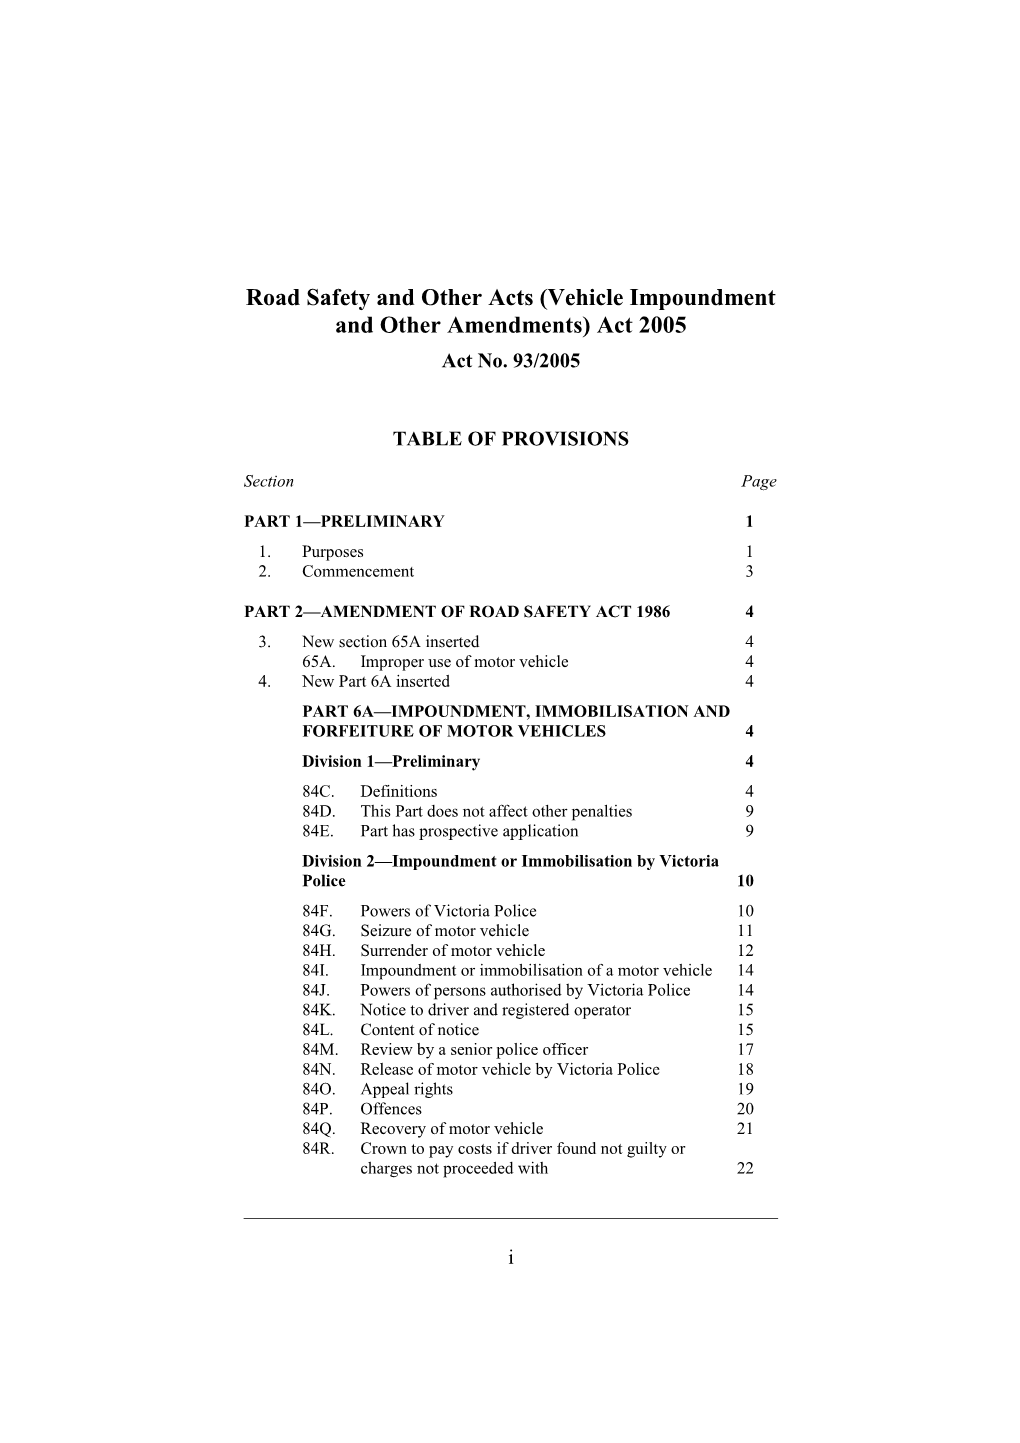 Road Safety and Other Acts (Vehicle Impoundment and Other Amendments) Act 2005